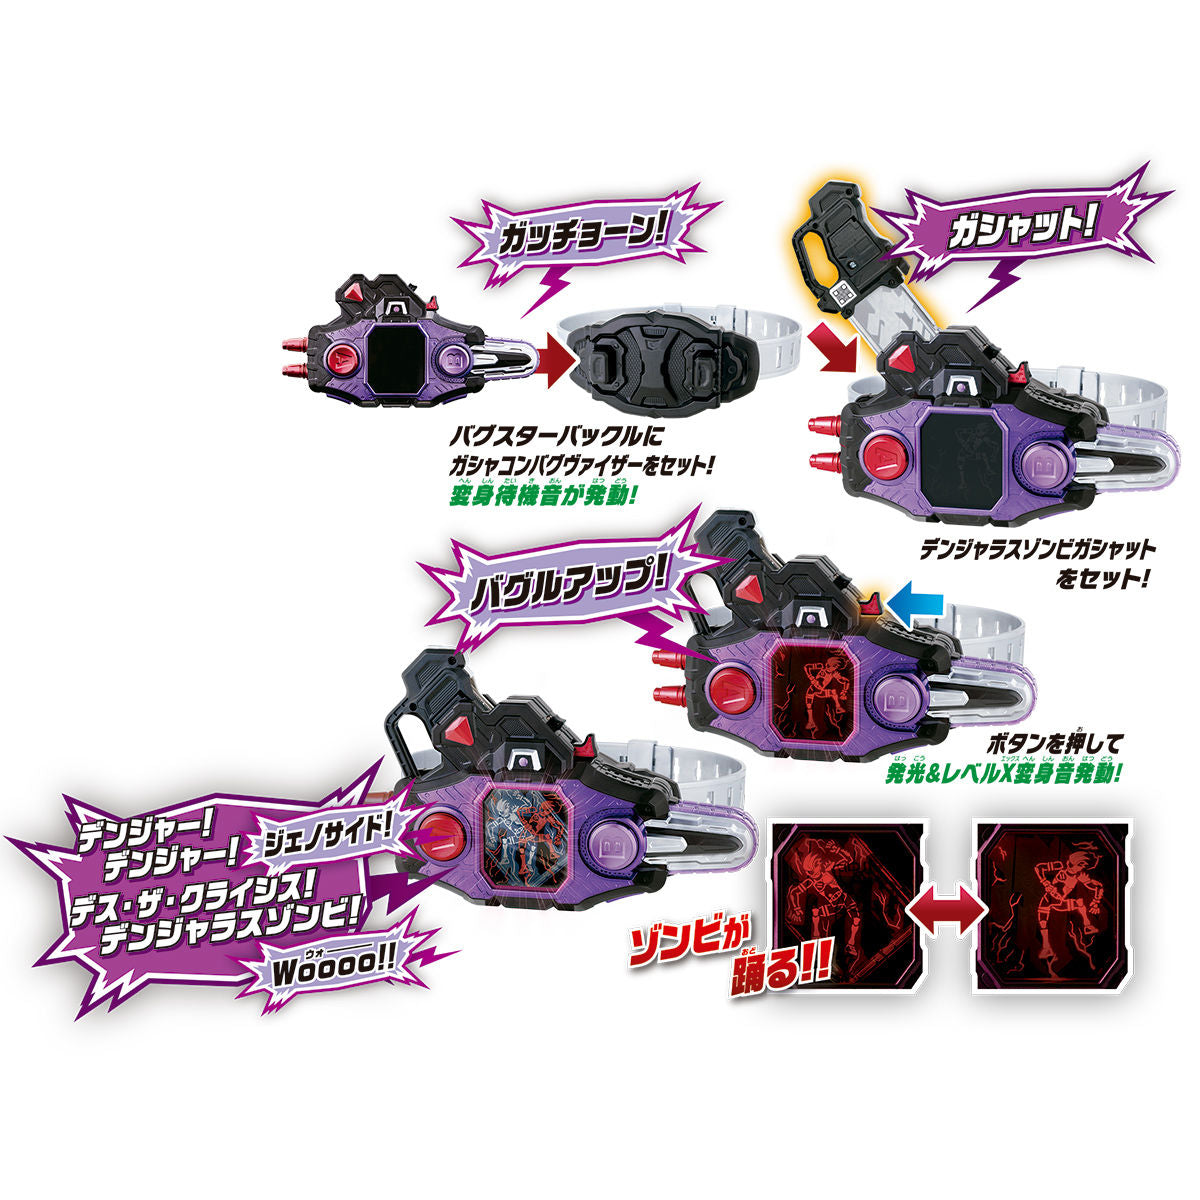 DX Buggle Driver 20th Version